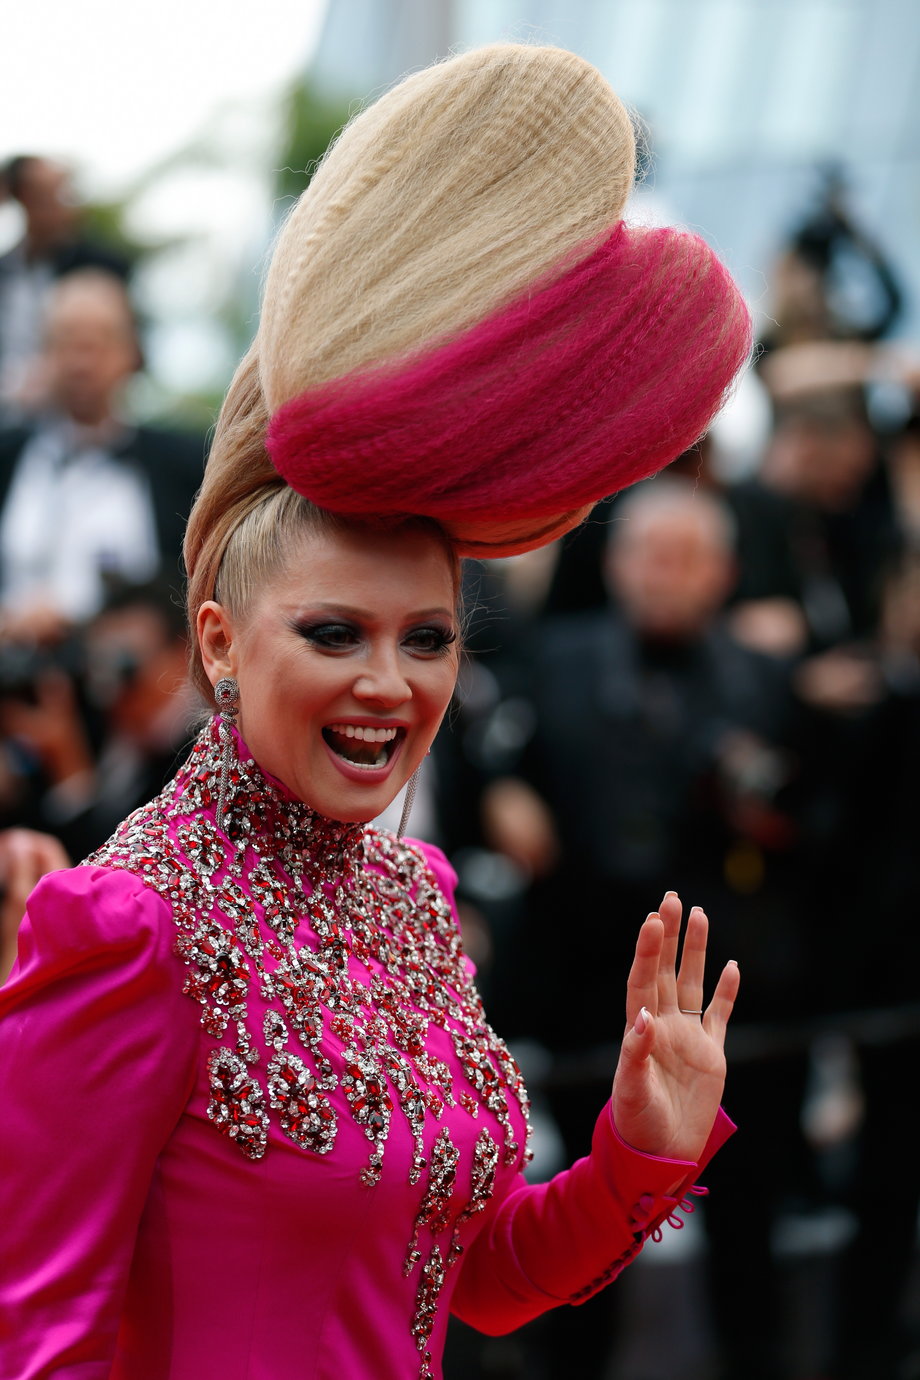 Russian TV star Elena Lenina continues her tradition of arriving on the red carpet with an insane hairstyle.